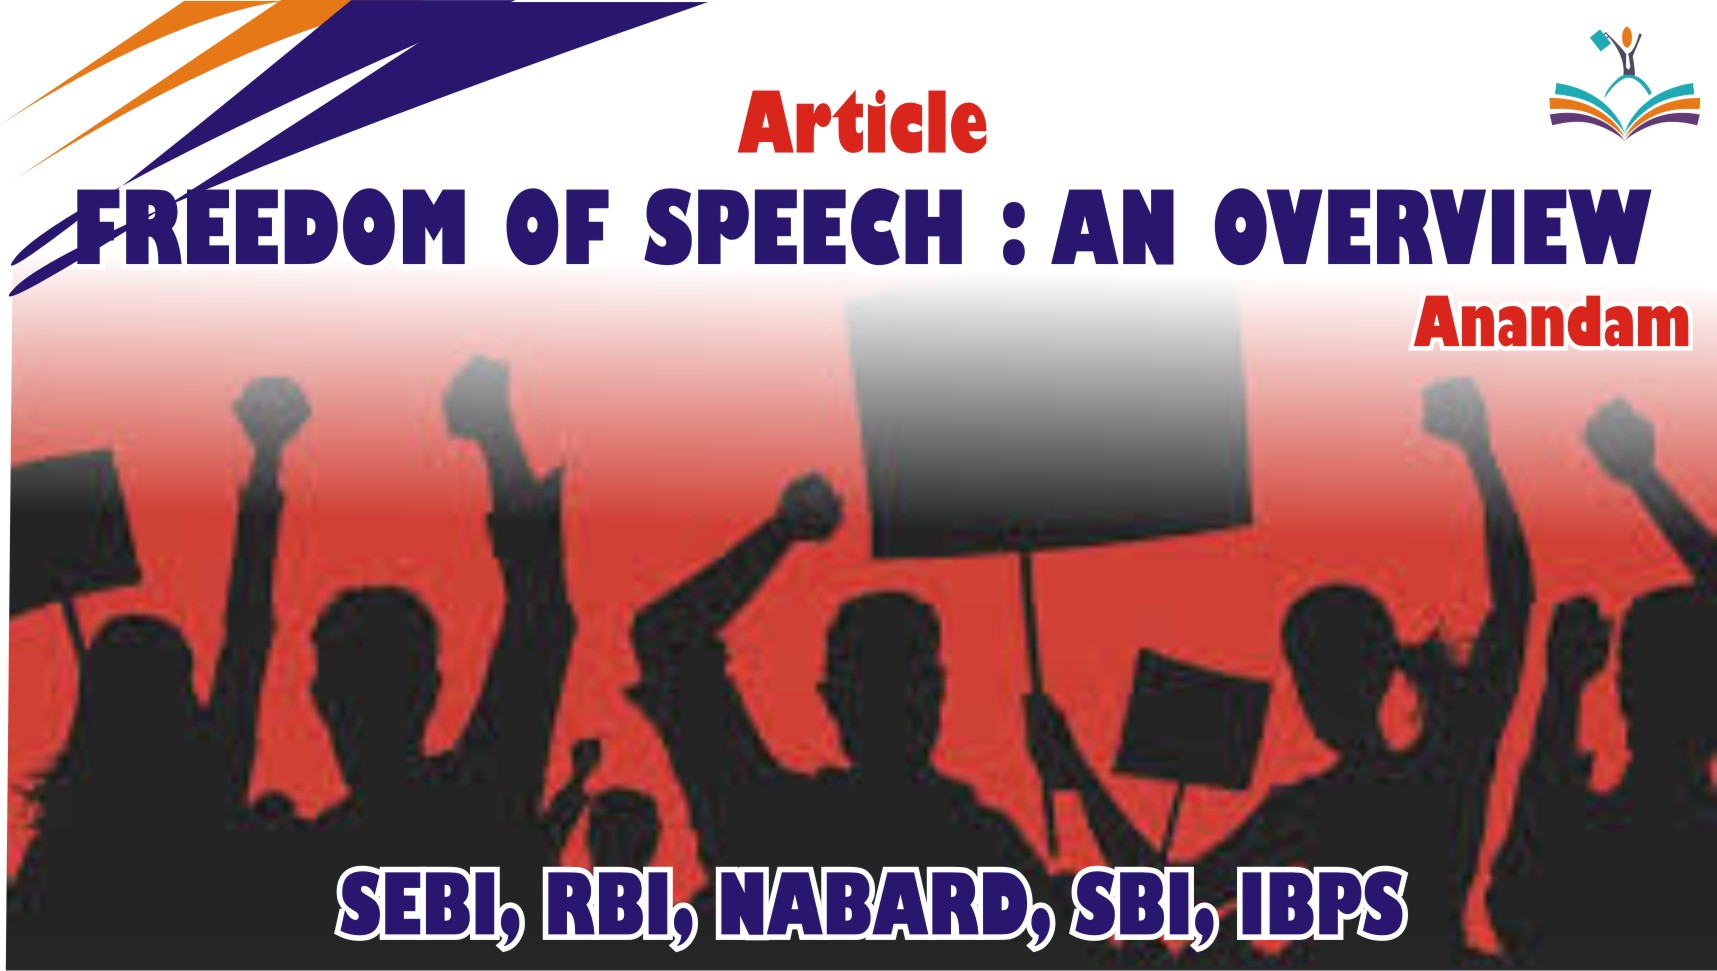 freedom of expression and association